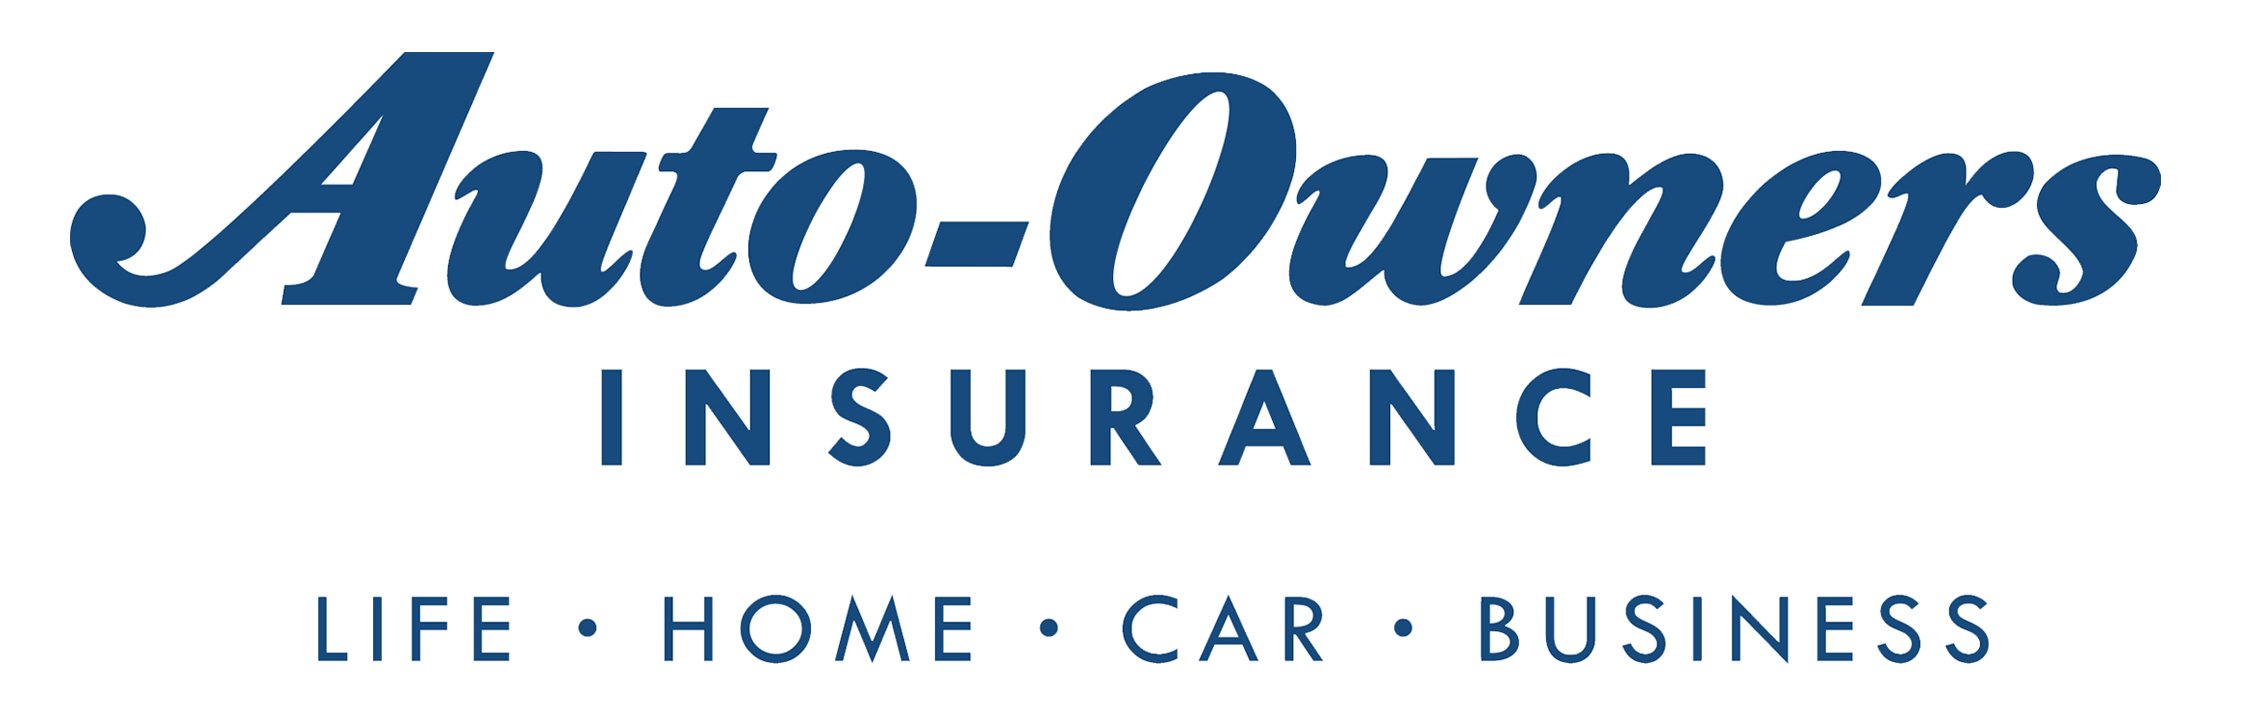 Auto-Owners Auto Insurance